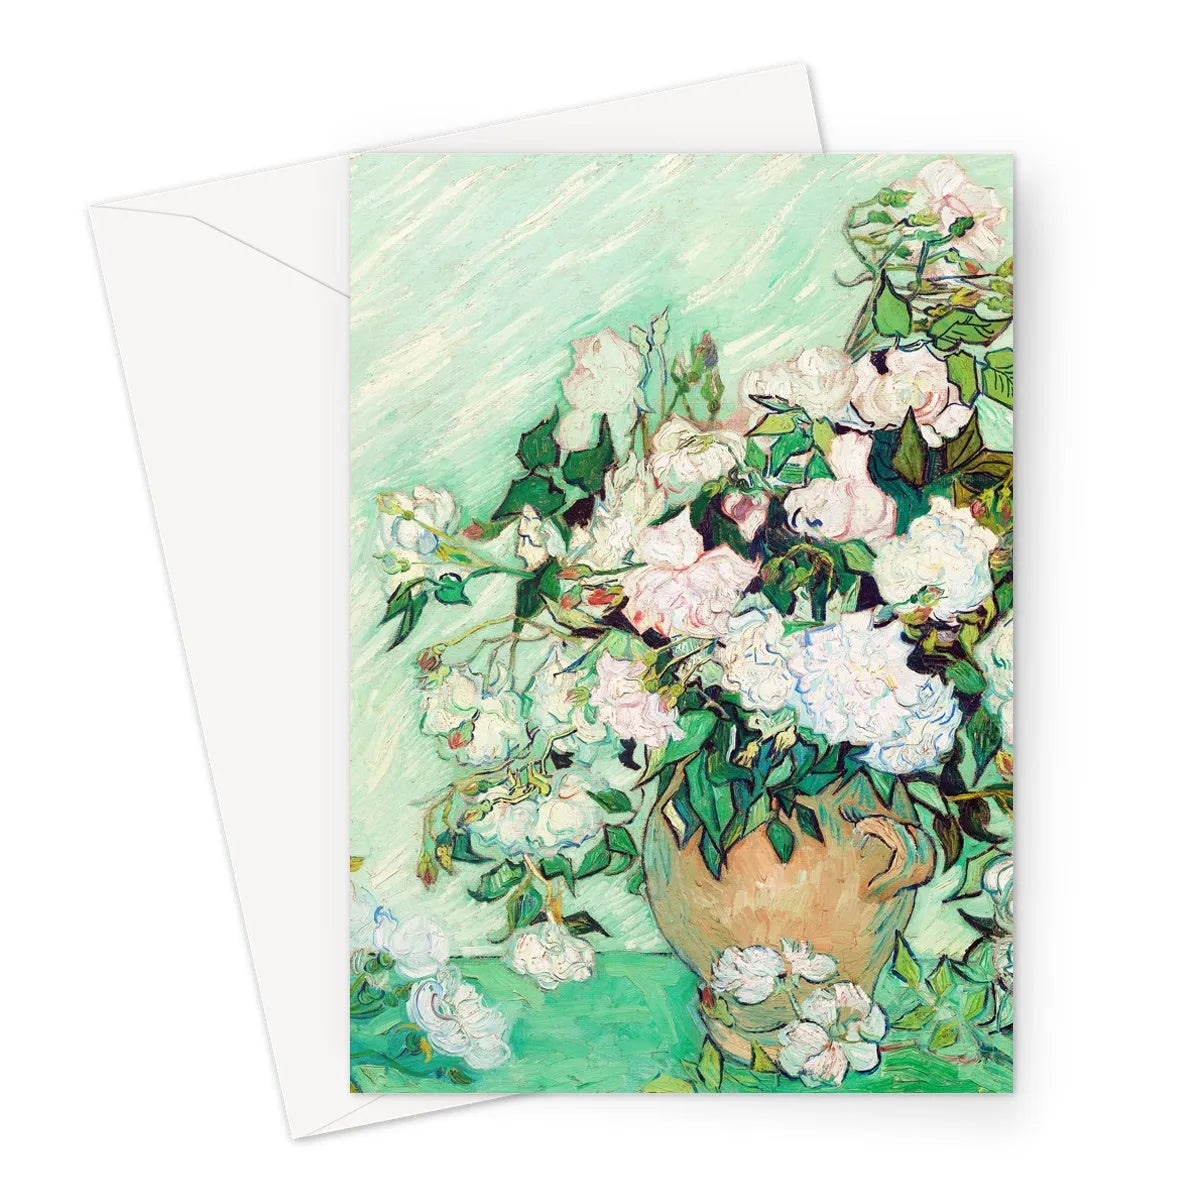 Rose By Vincent Van Gogh Greeting Card - A5 Portrait / 1 Card - Greeting & Note Cards - Aesthetic Art